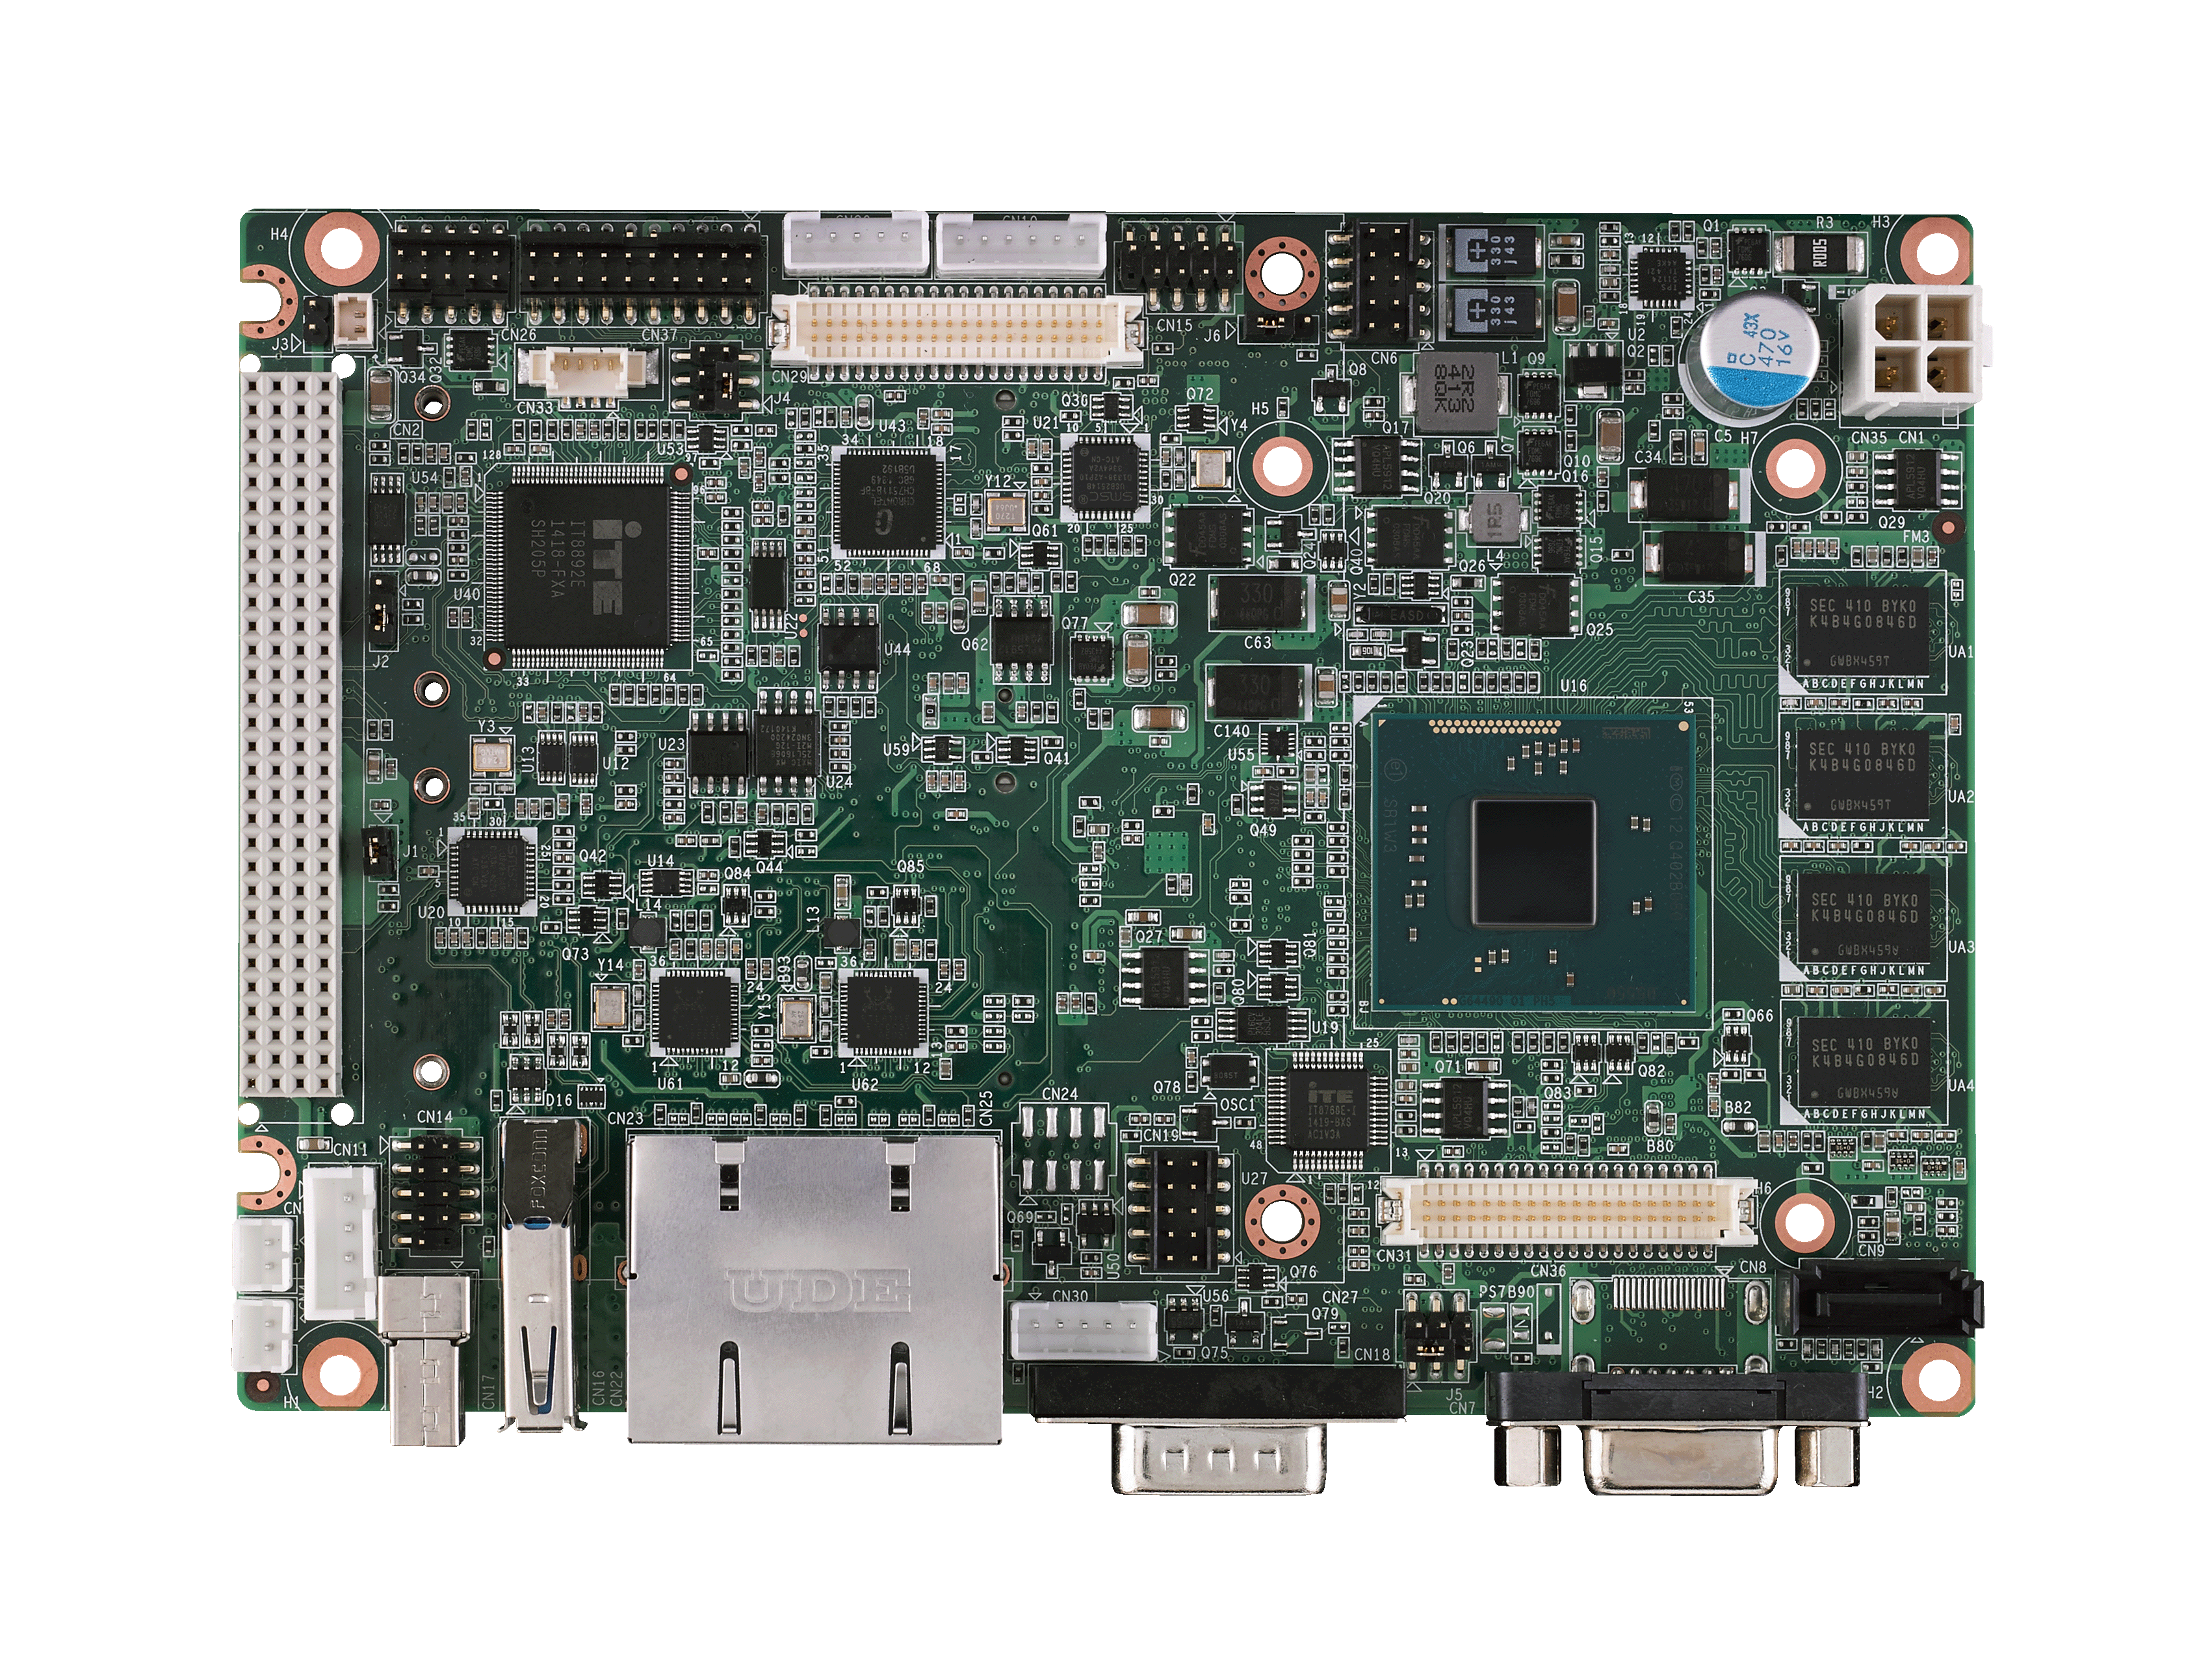 3.5" Embedded Single Board Computer Intel<sup>®</sup> Celeron N2930, onboard 4GB, 48-bit LVDS, 2GbE, Mini PCIe, PCI-104, VGA+LVDS,  Wide Temp Support (-40 ~ 85° C)